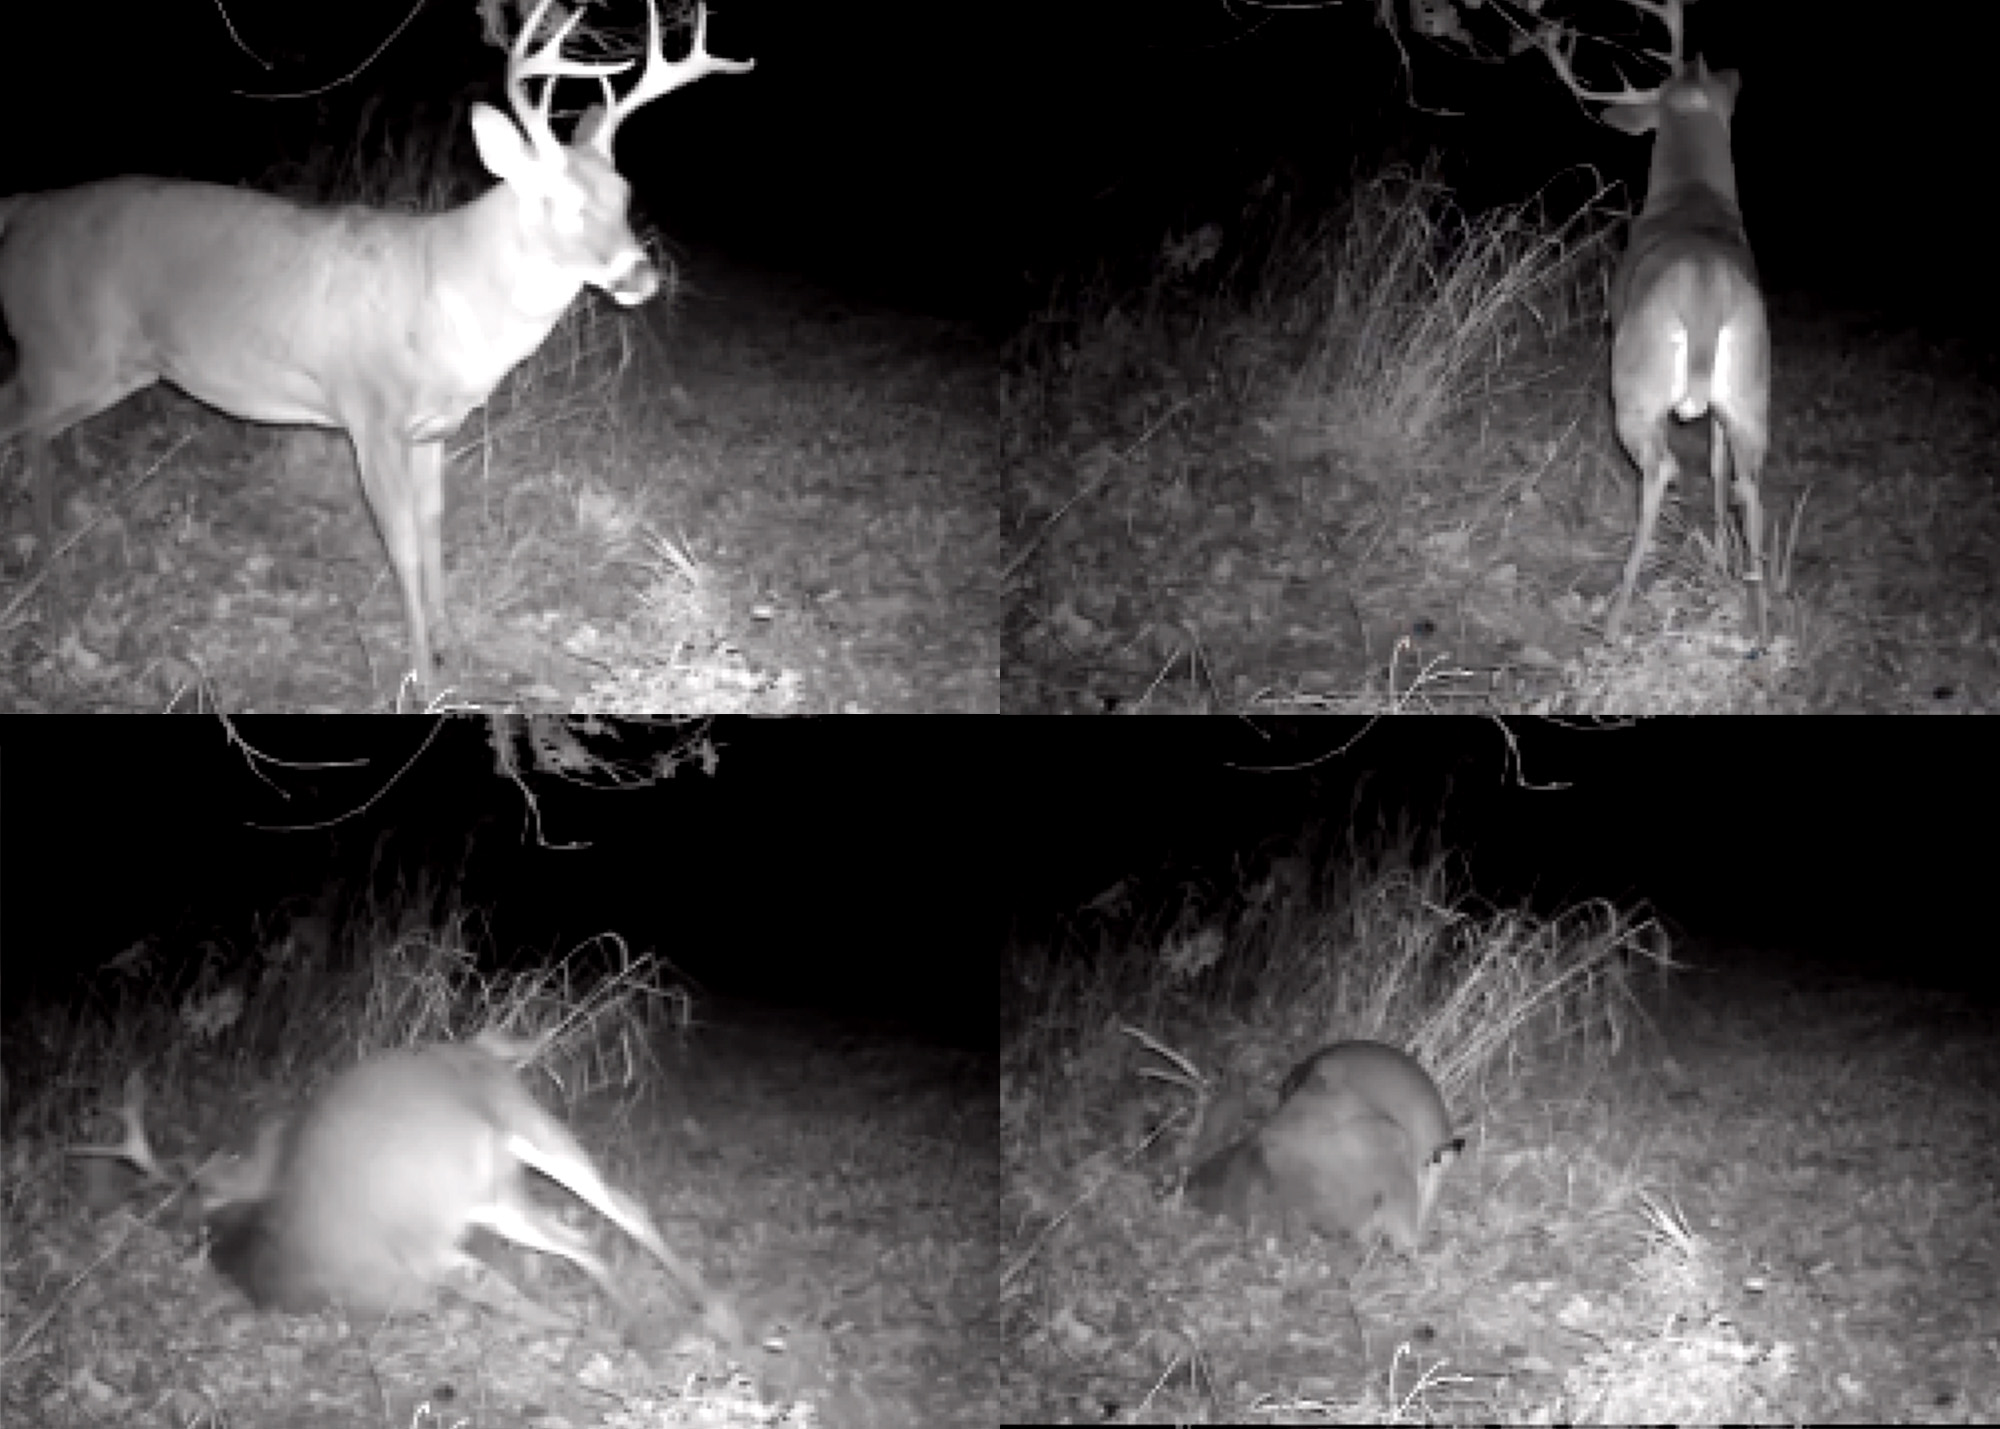 Video: Did This Buck Have a Seizure While Working a Scrape?